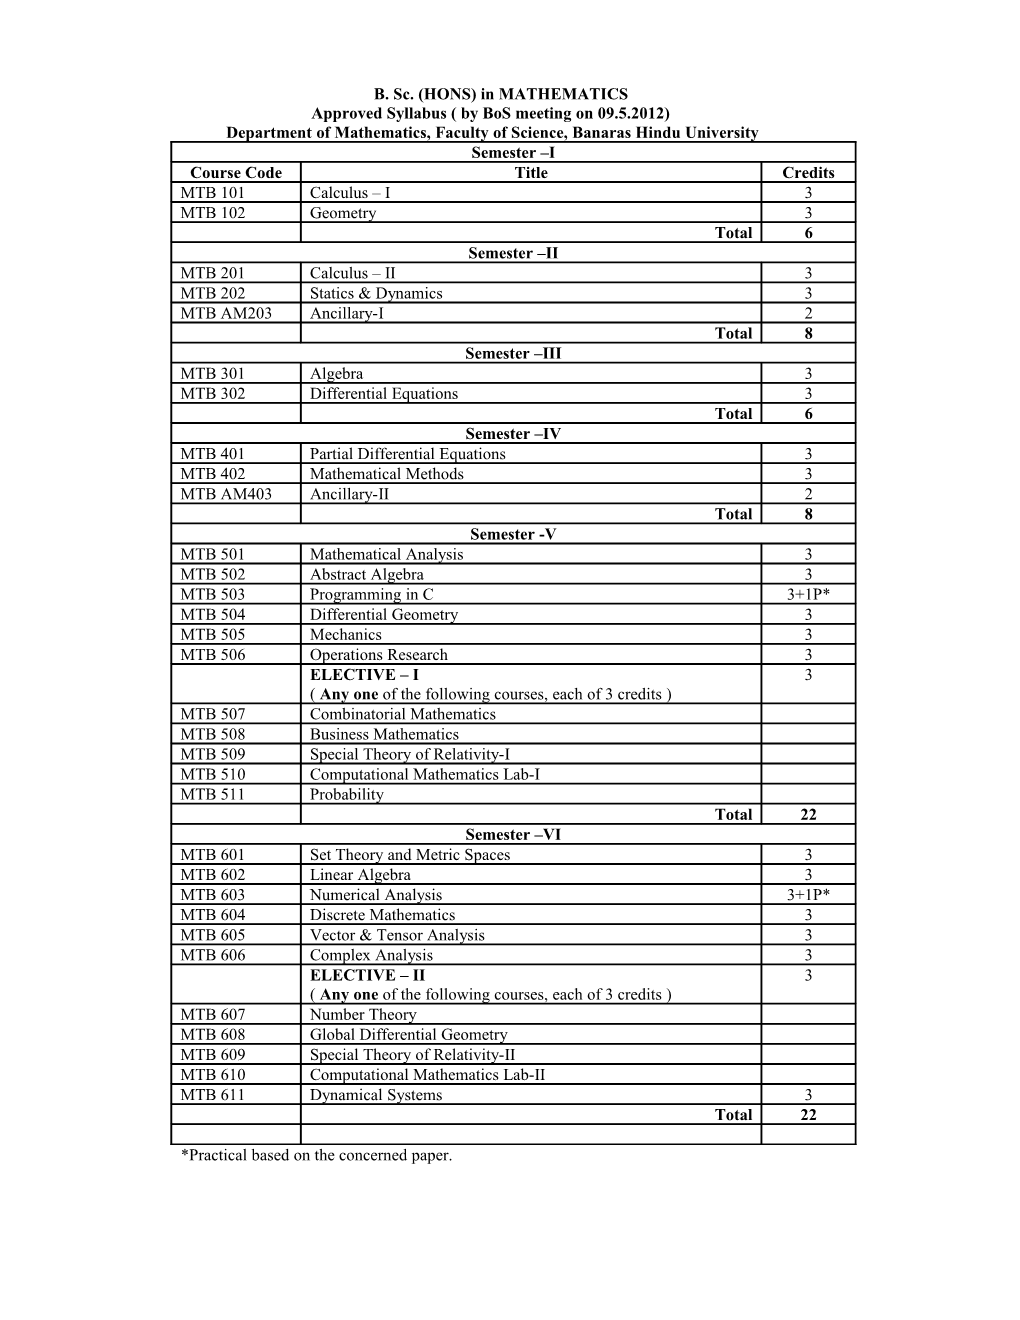 Approved Syllabus(By Bos Meeting on 09.5.2012)